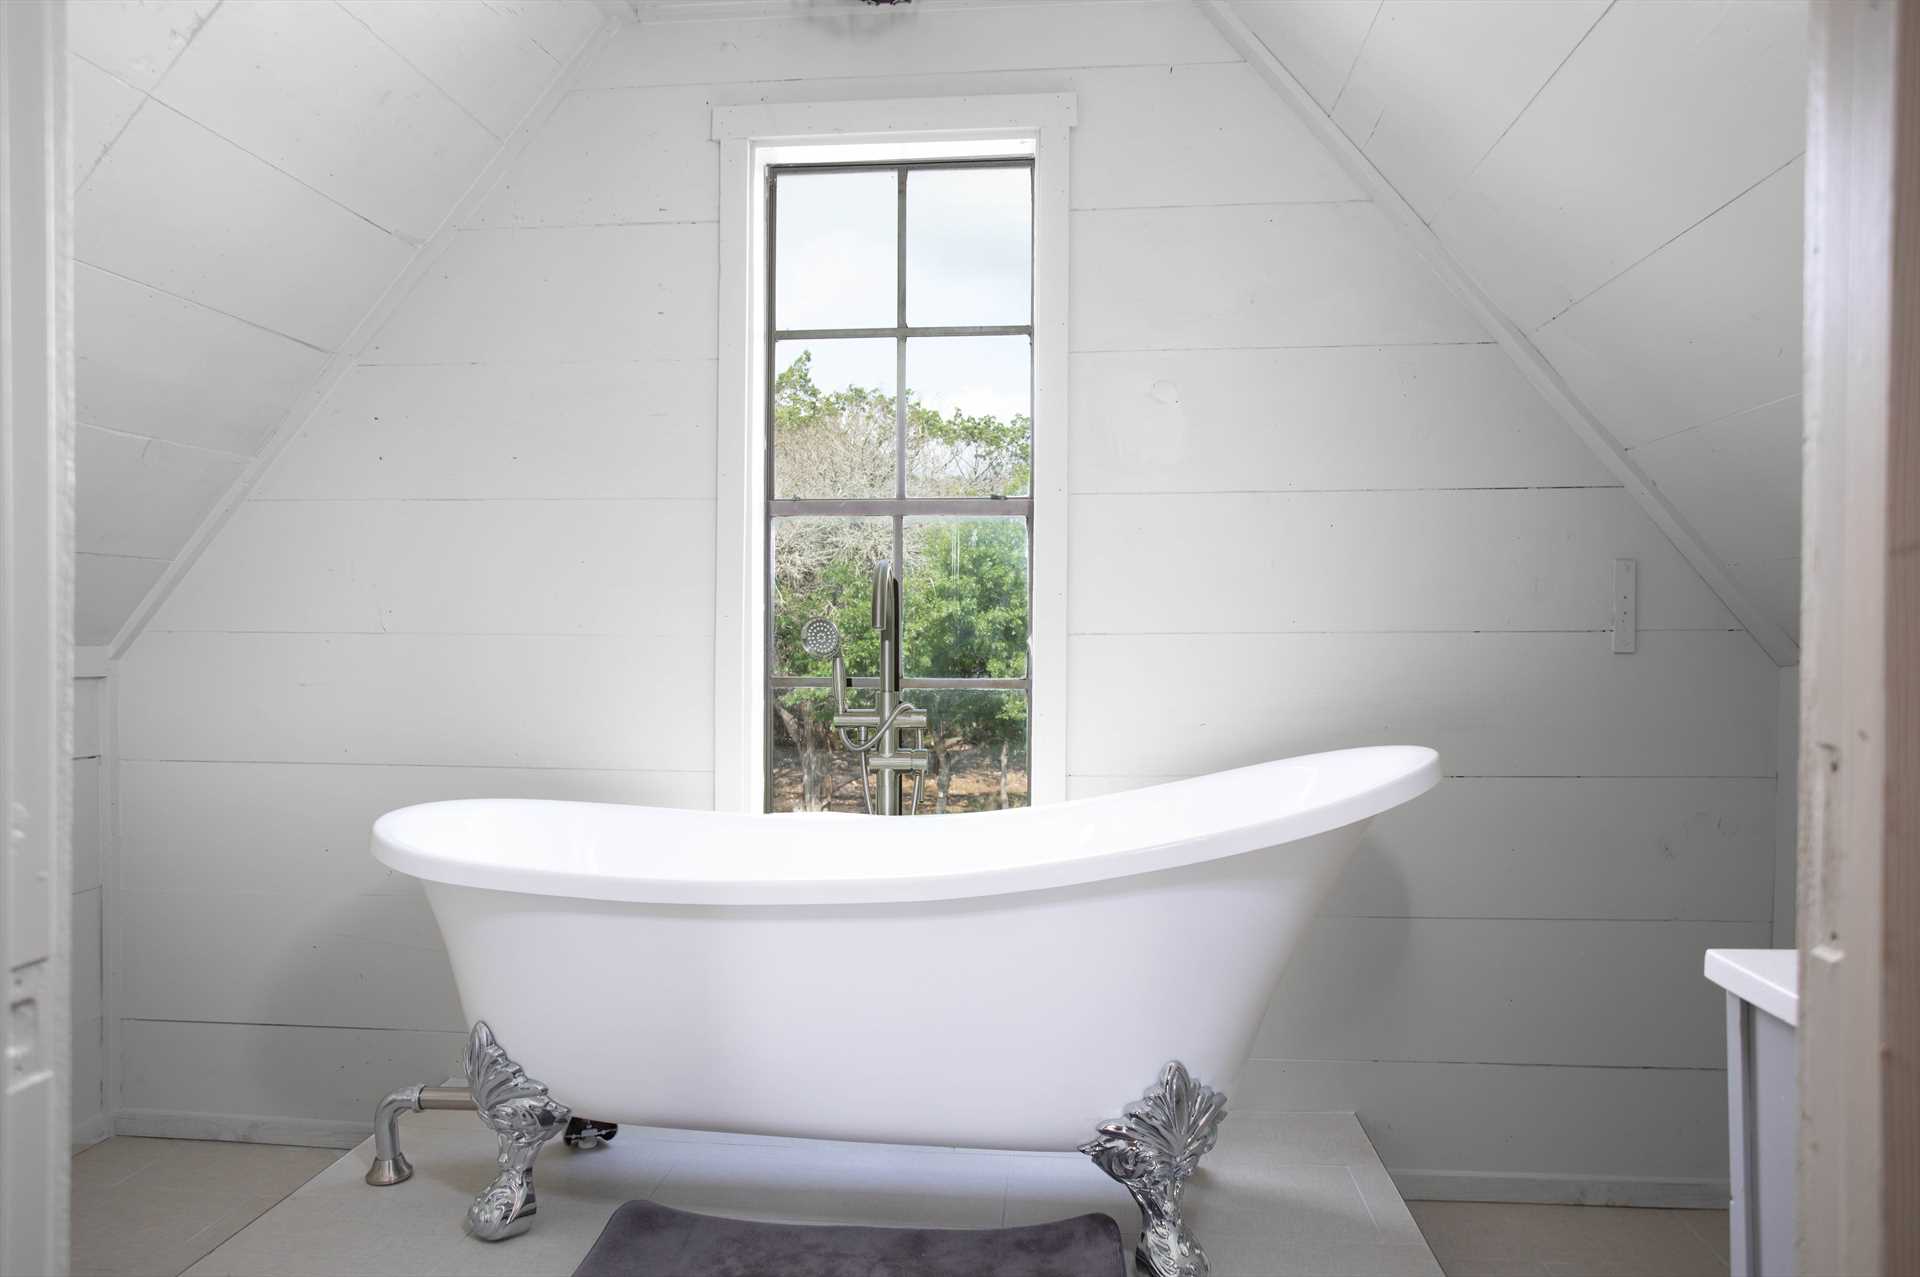                                                 The clean and bright space of the second full bath has a nostalgic clawfoot tub as its centerpiece!